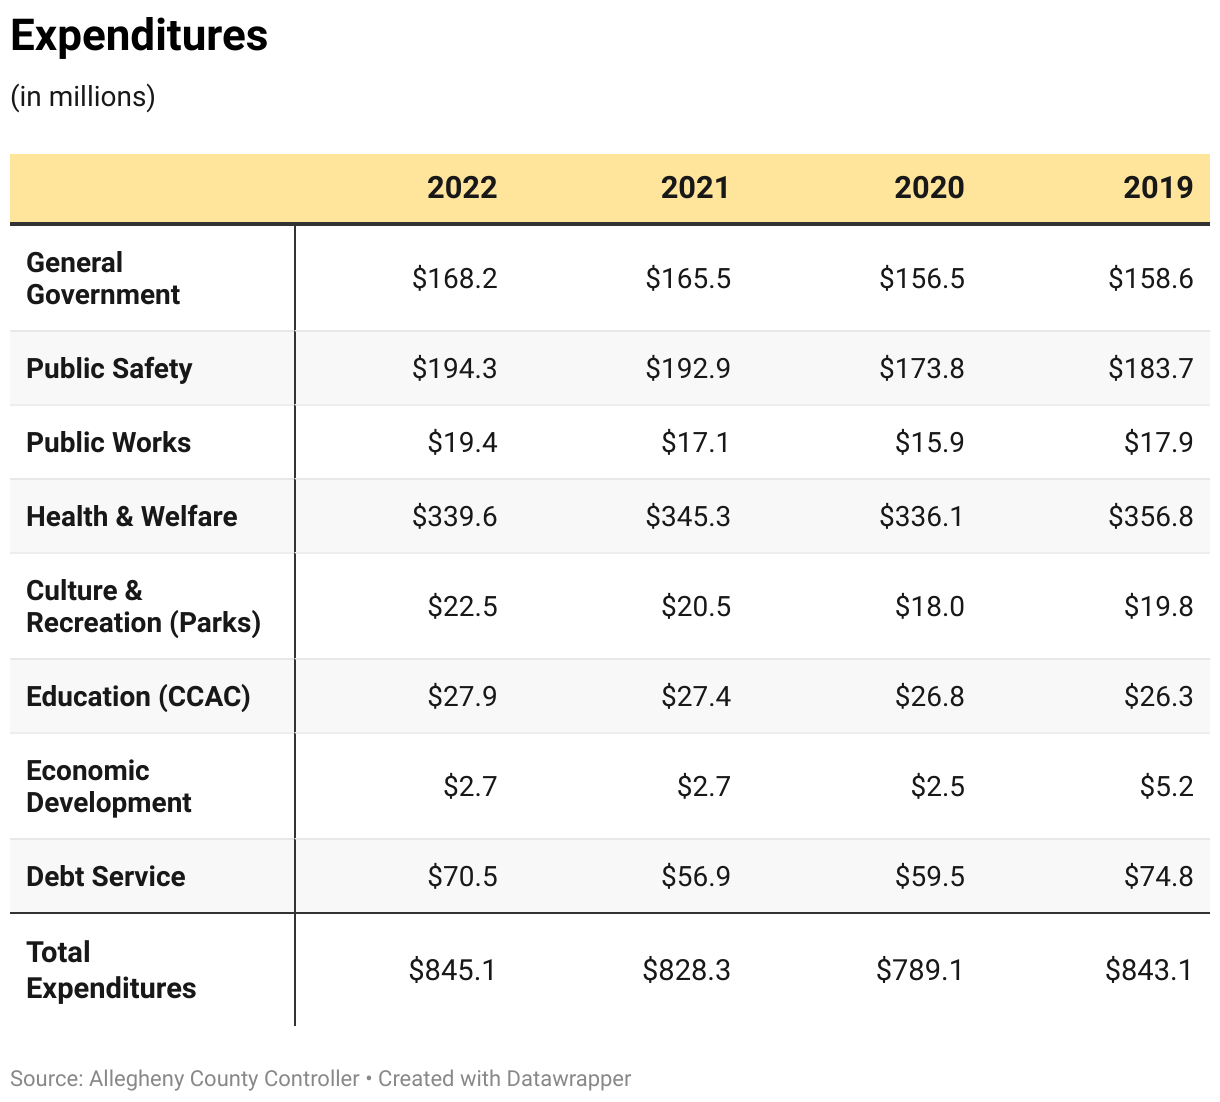 Table showing the breakdown of Allegheny County expenditures by government function from 2019 to 2022.